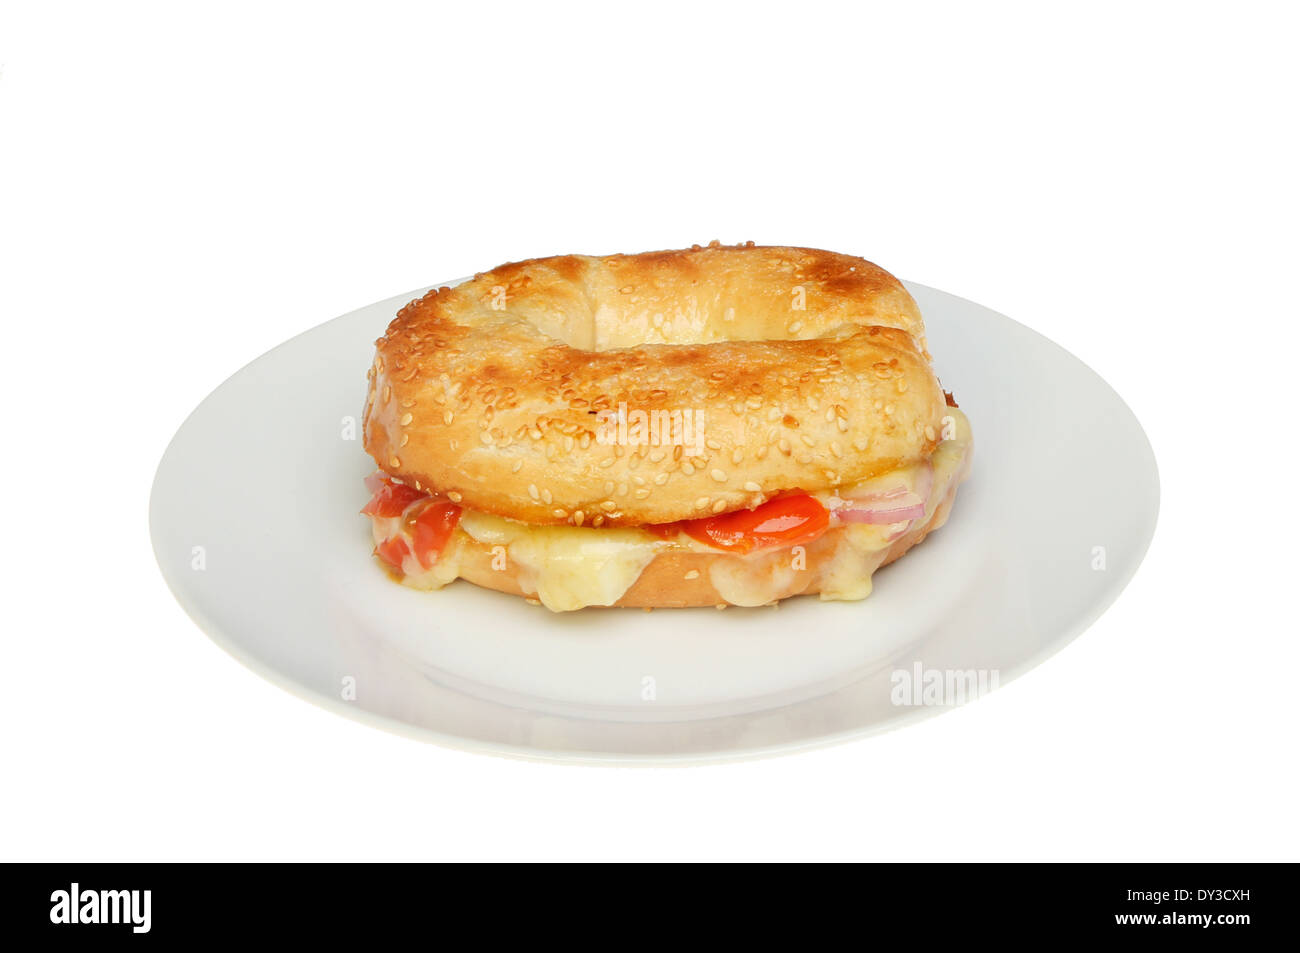 Toasted sesame seeded bagel filled with cheese, onion and tomato on a plate isolated against white Stock Photo